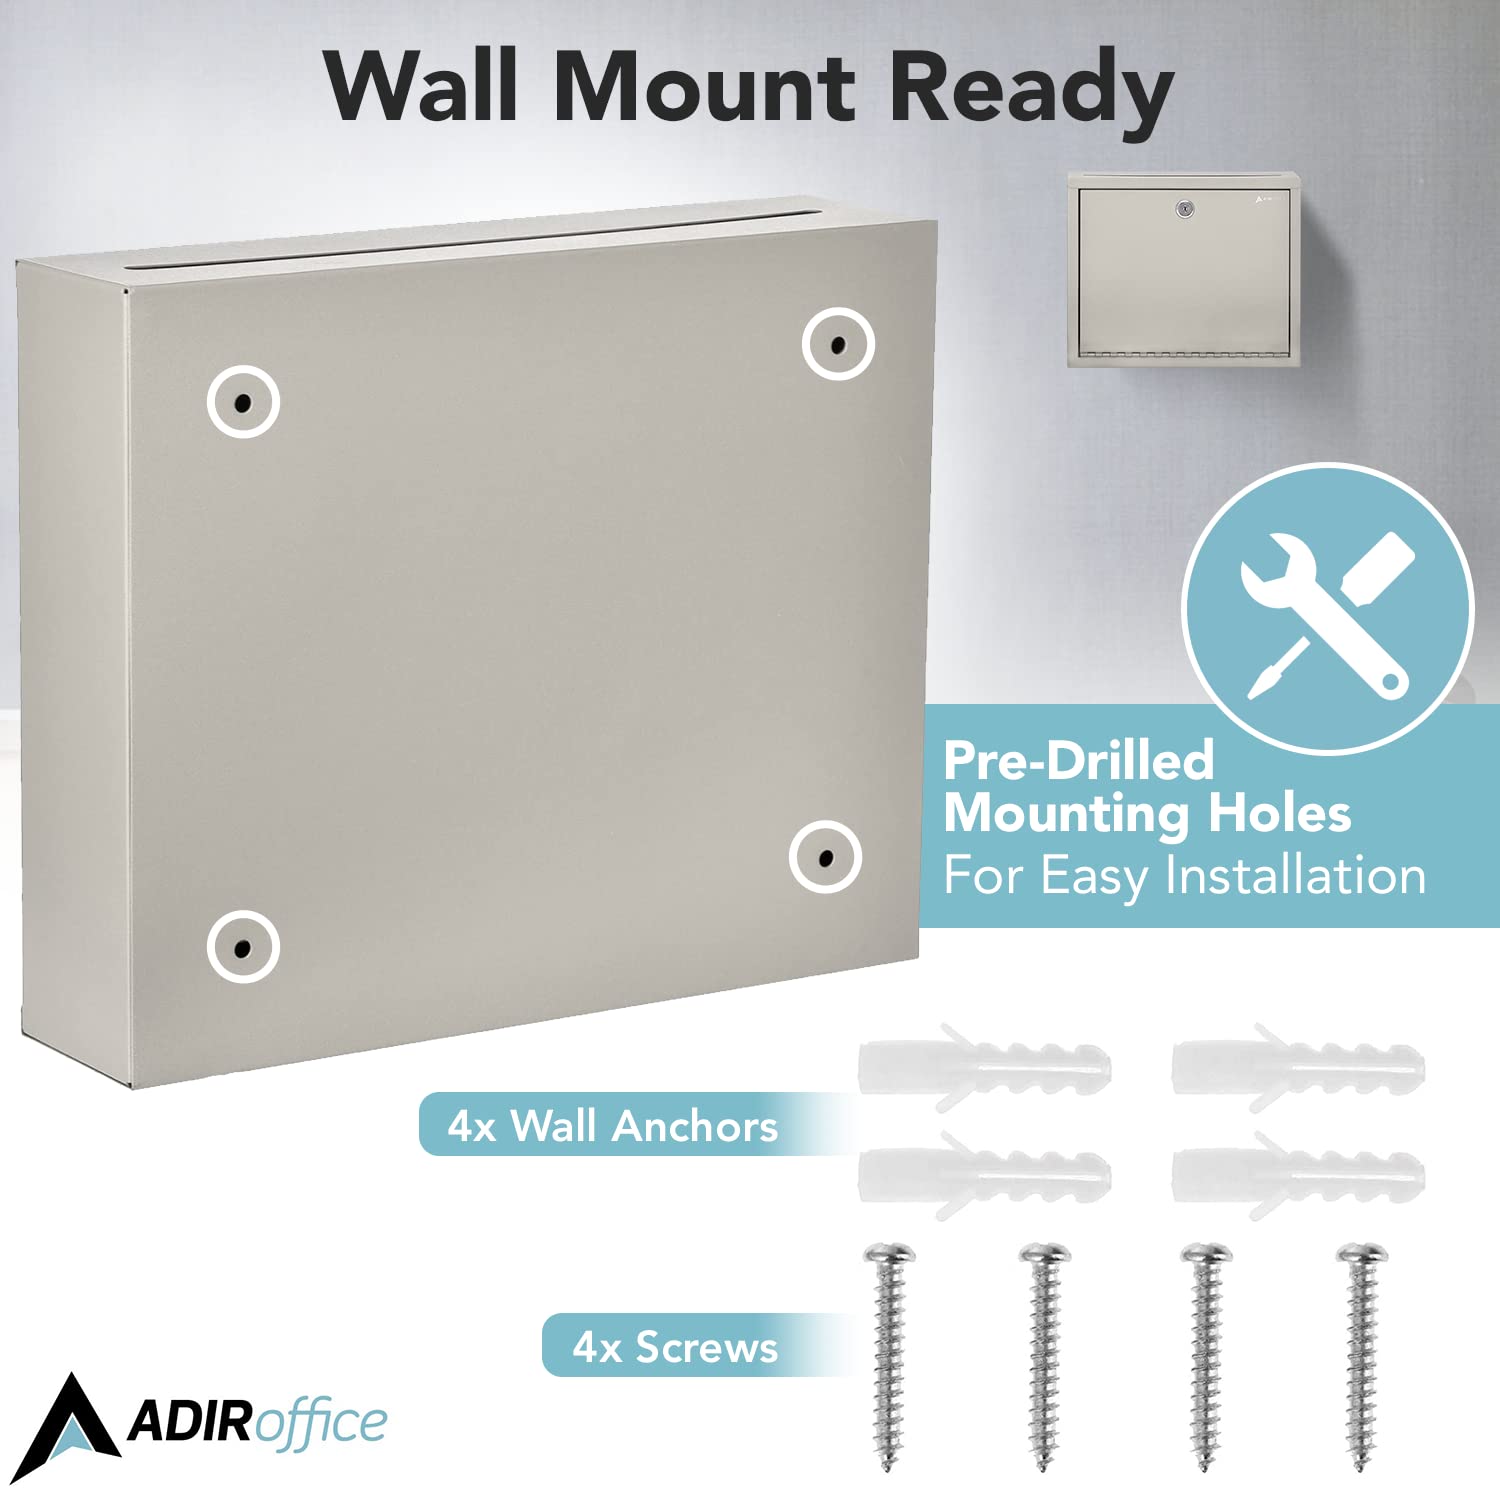 AdirOffice Multi Purpose Mail Box with Lock - Heavy Duty Drop Box - Commercial Suggestion Box -Wall Mountable Safe and Secure Ballot Box Variation  - Good